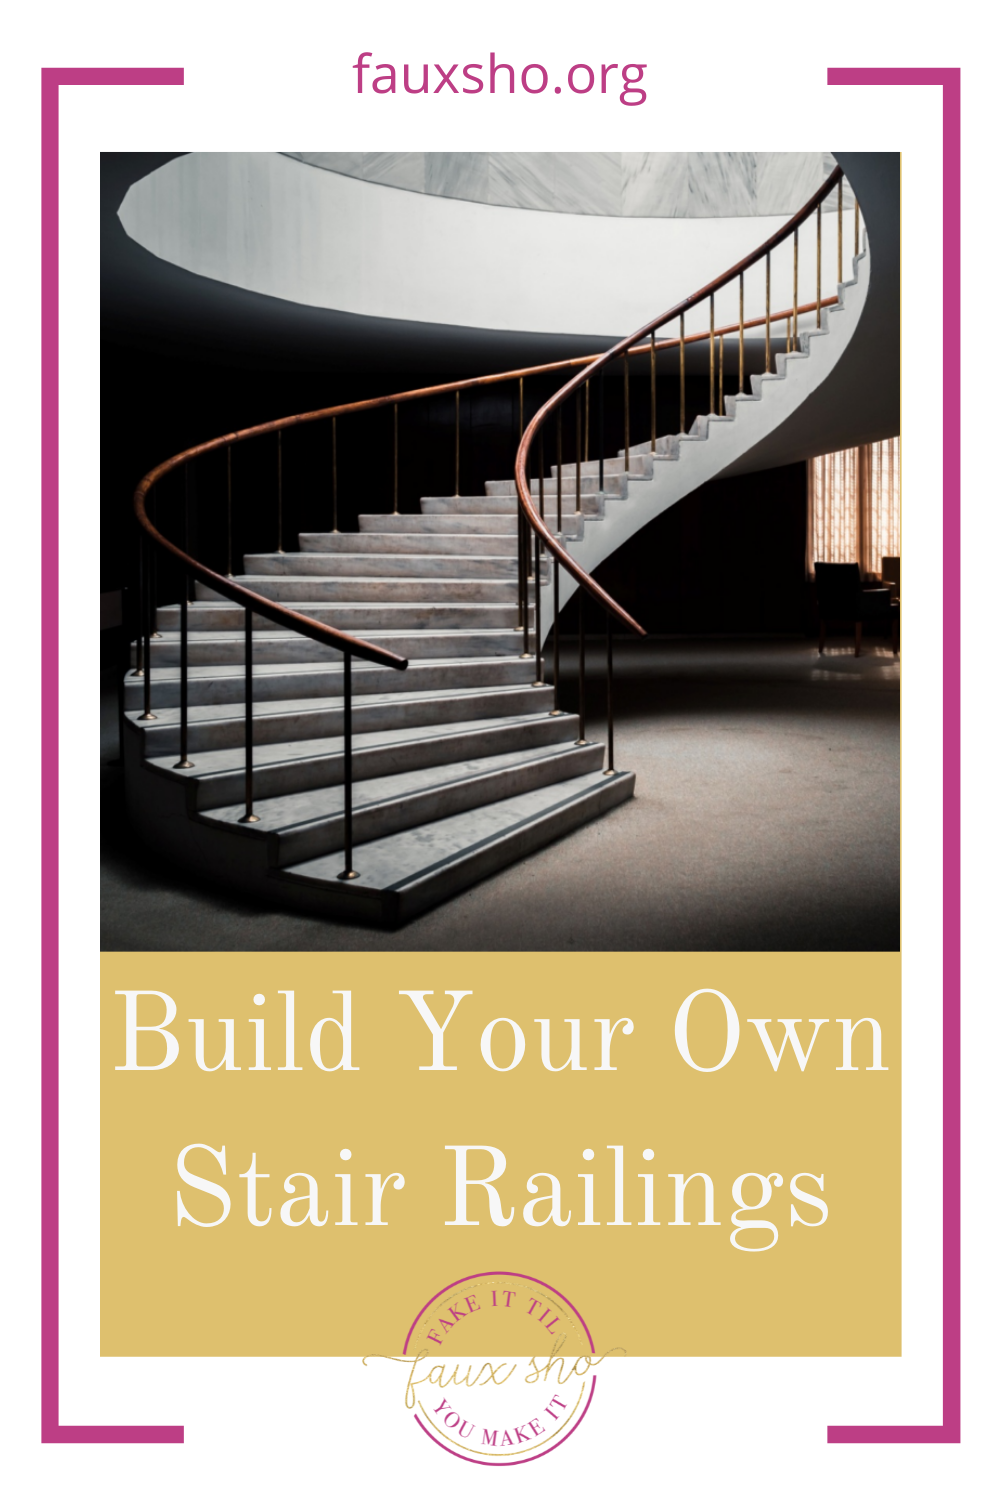 Fauxsho.org is loaded with DIY ideas for crafters of all skill levels and abilities! Transform your space into something unique and personal. Find out how you can build your very own stair railing!